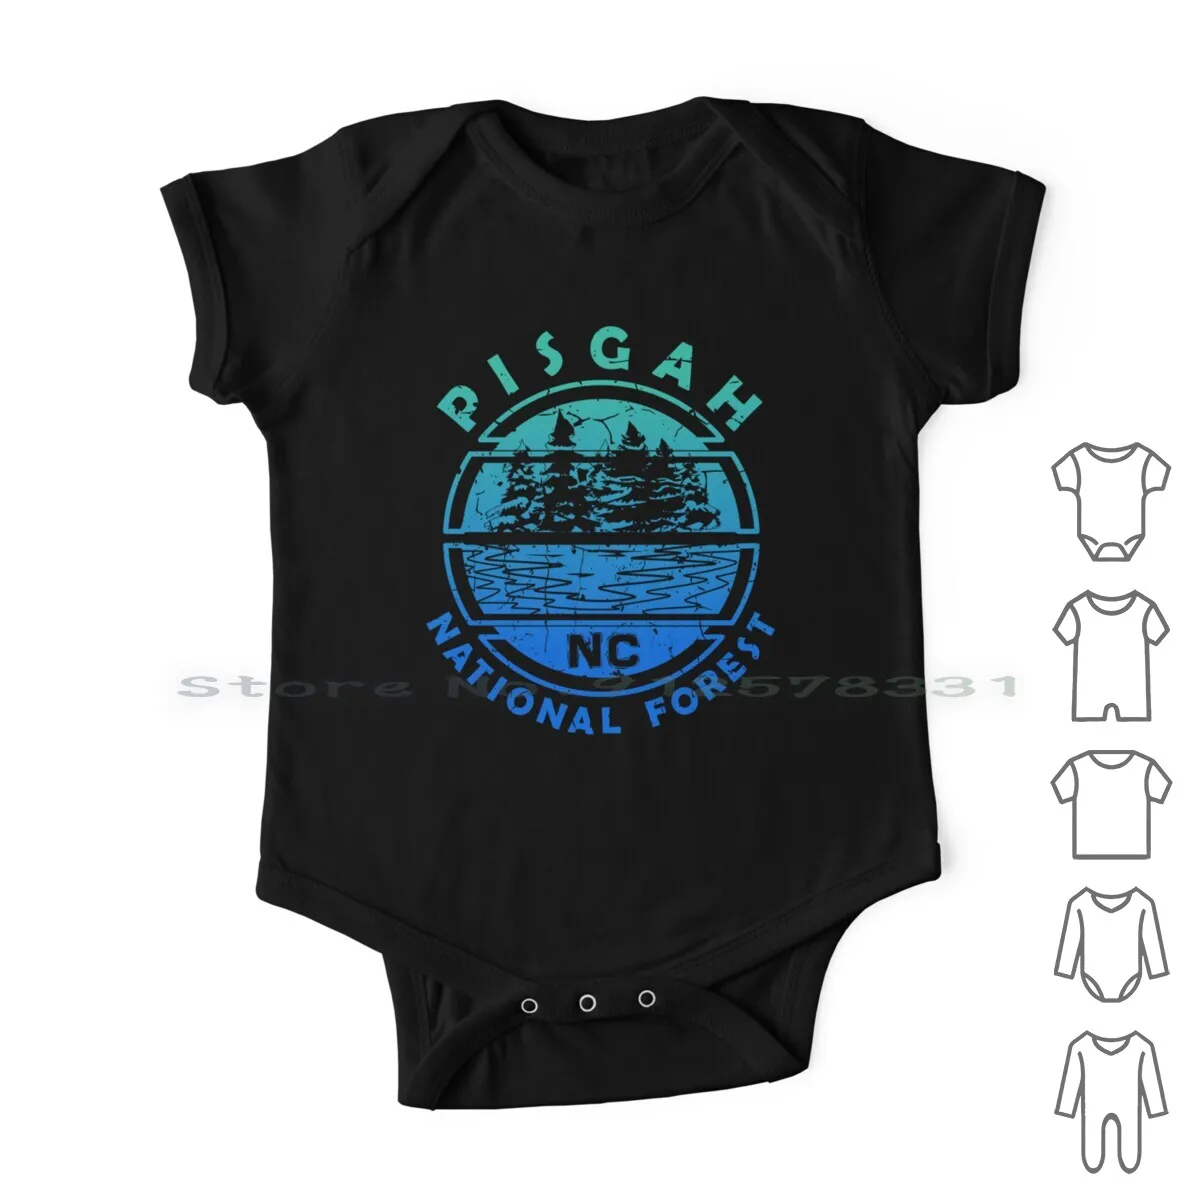 

Pisgah National Forest Nc – North Carolina Usa Newborn Baby Clothes Rompers Cotton Jumpsuits Pisgah National Forest Pisgah